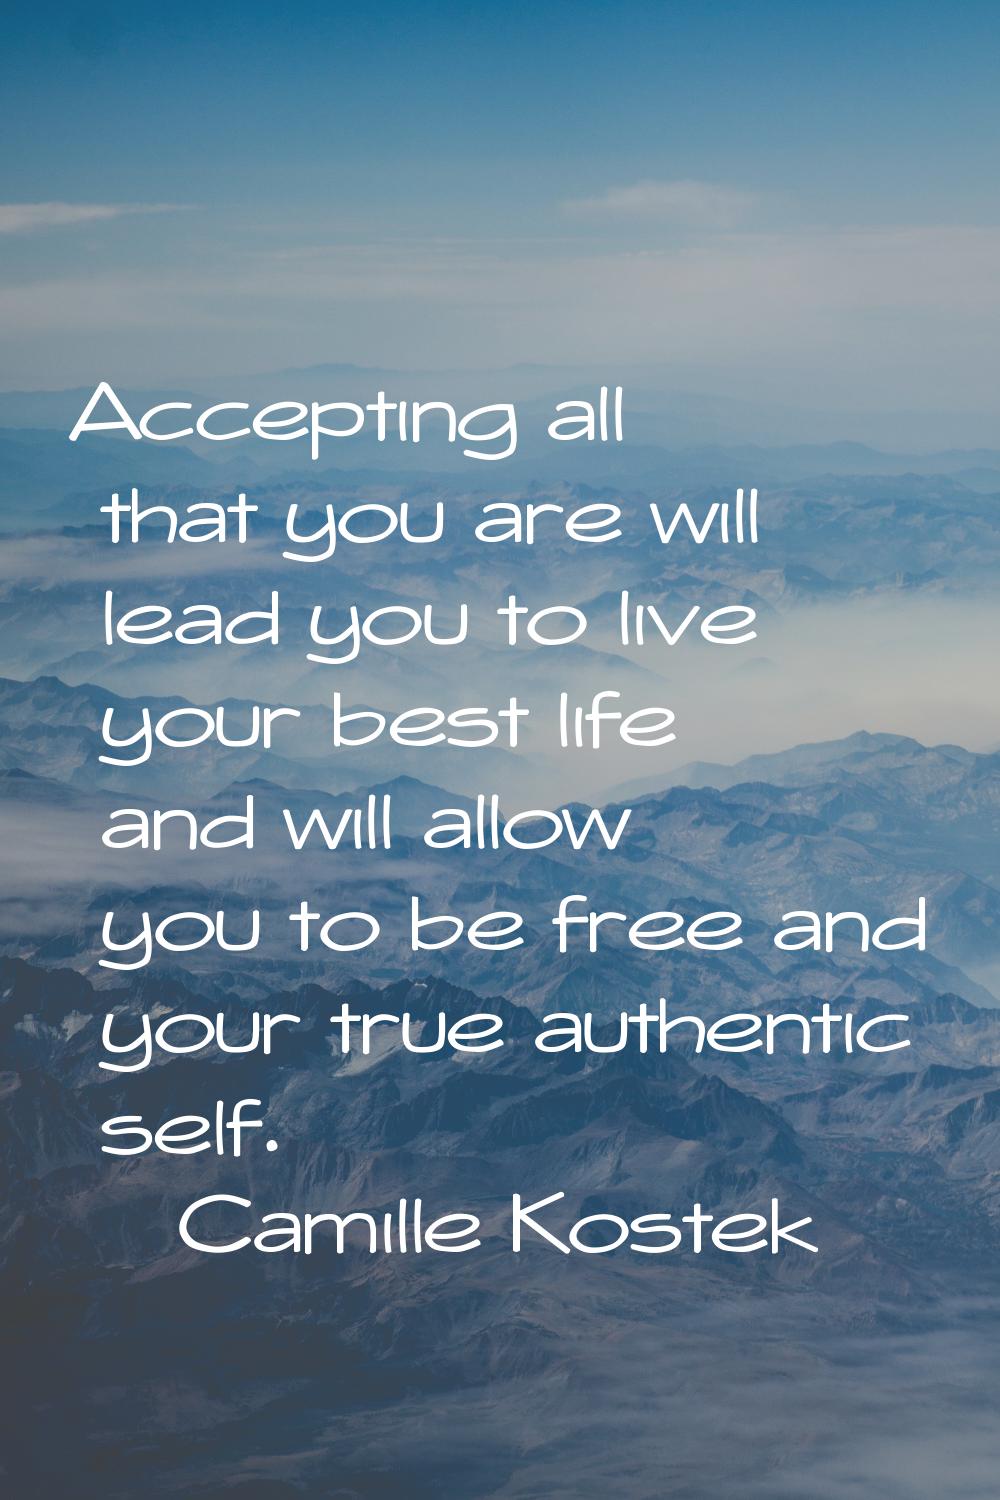 Accepting all that you are will lead you to live your best life and will allow you to be free and y